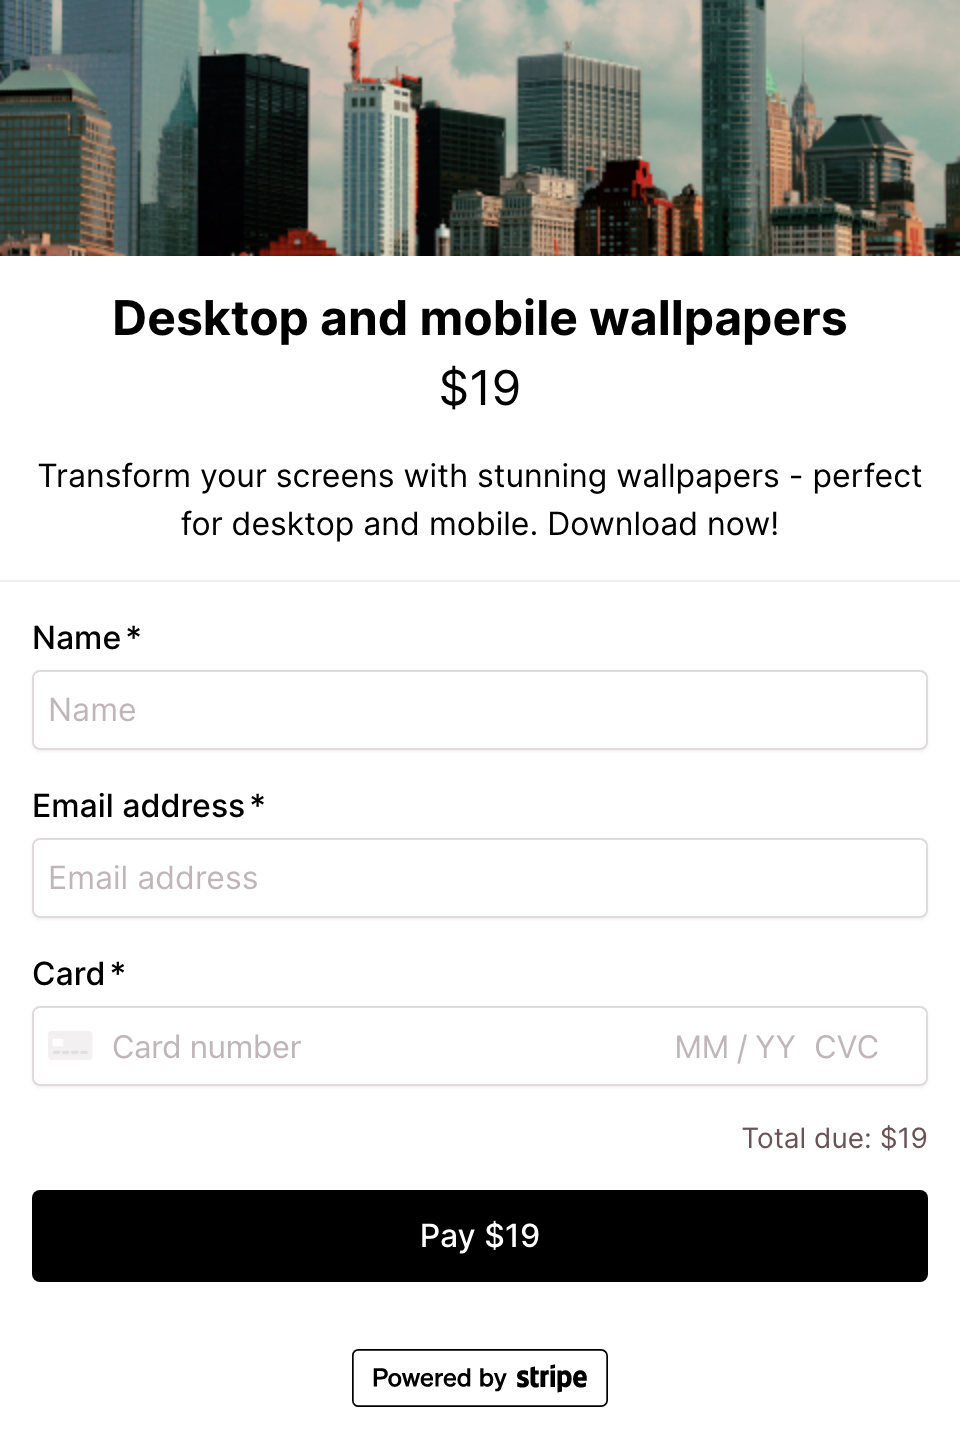 Desktop and mobile wallpapers checkout form